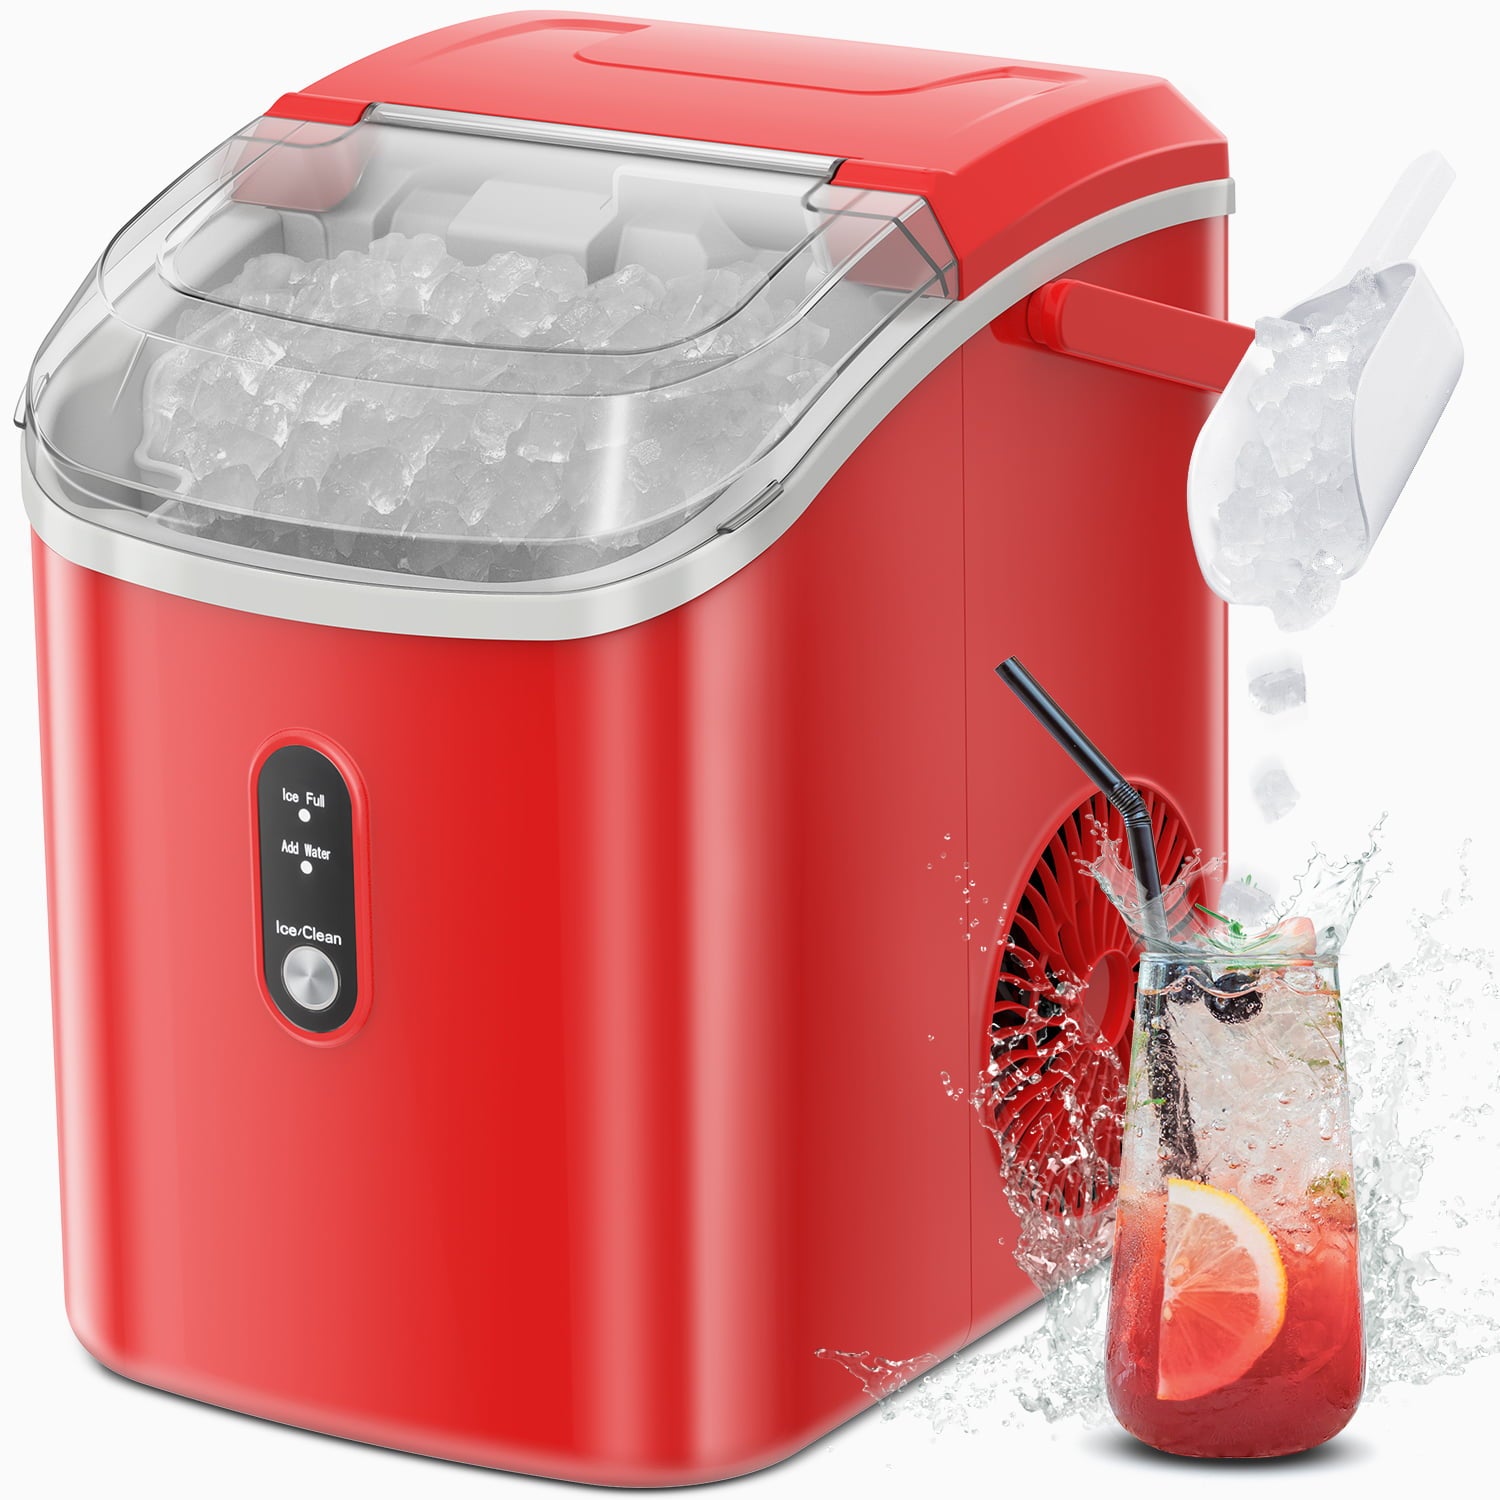 KISSAIR Countertop Ice Maker, Self-Cleaning Portable Ice Maker